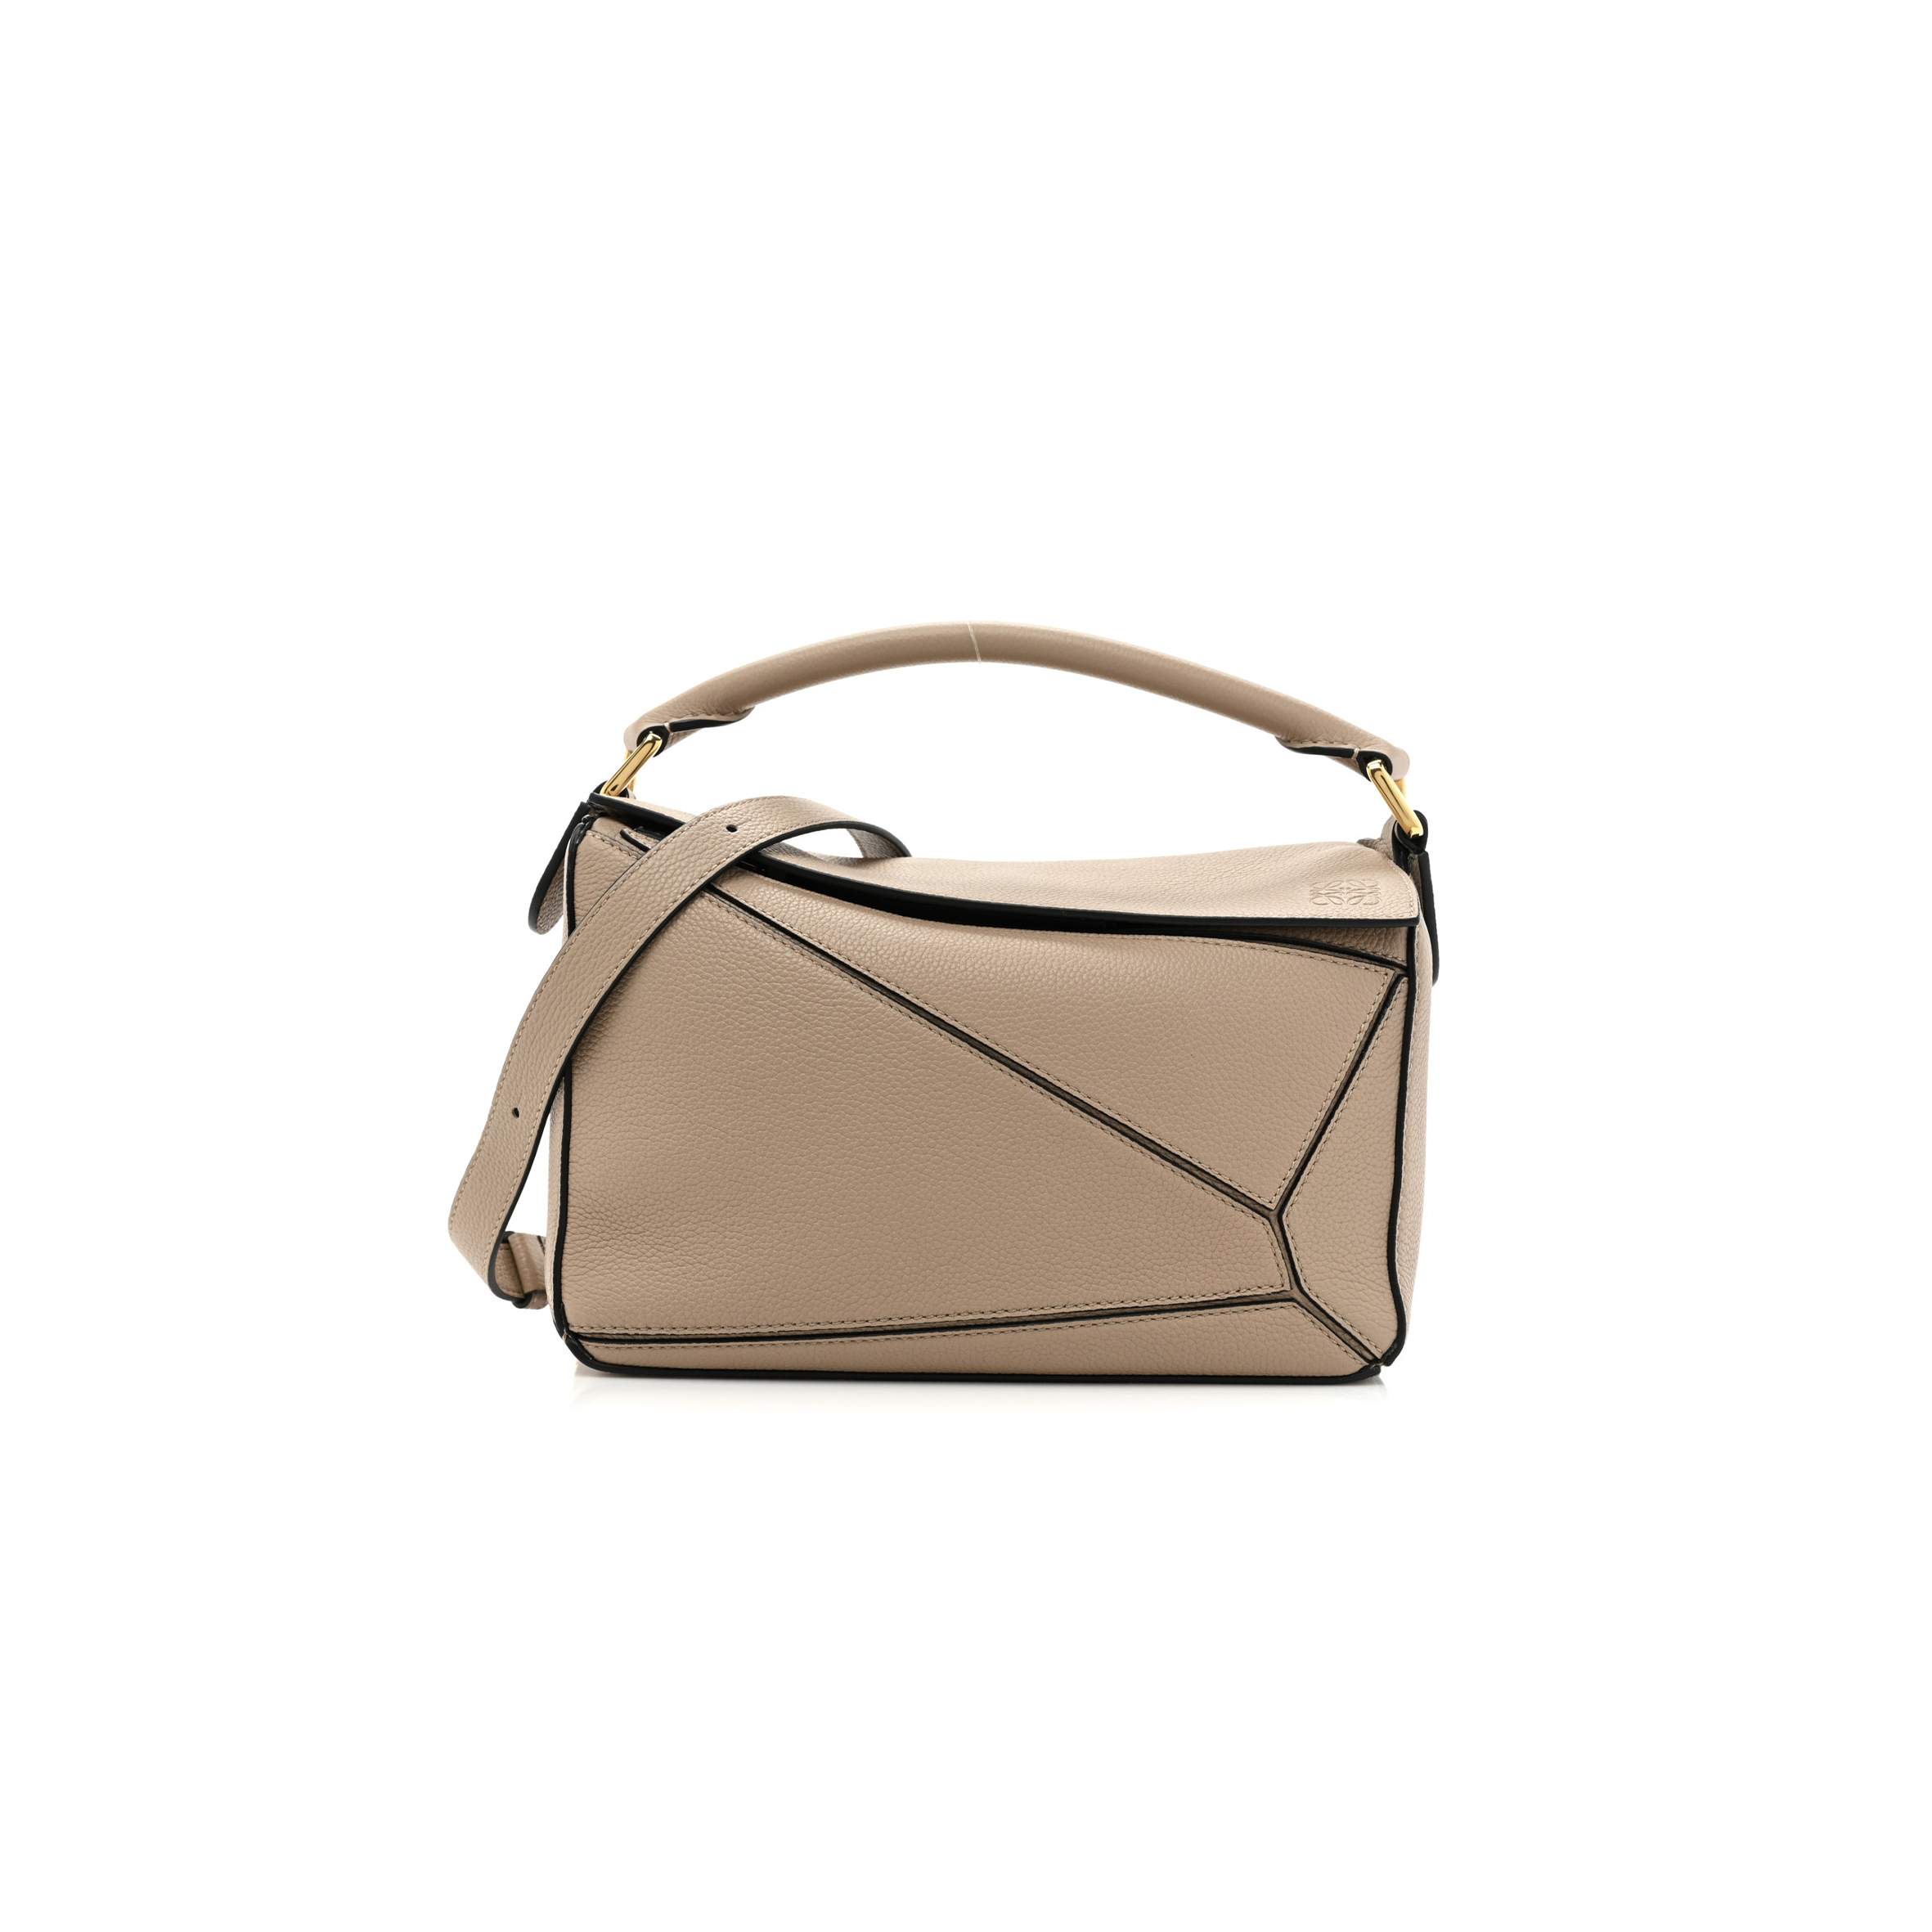 LOEWE GRAINED CALFSKIN SMALL PUZZLE BAG SAND (24*15*10cm)